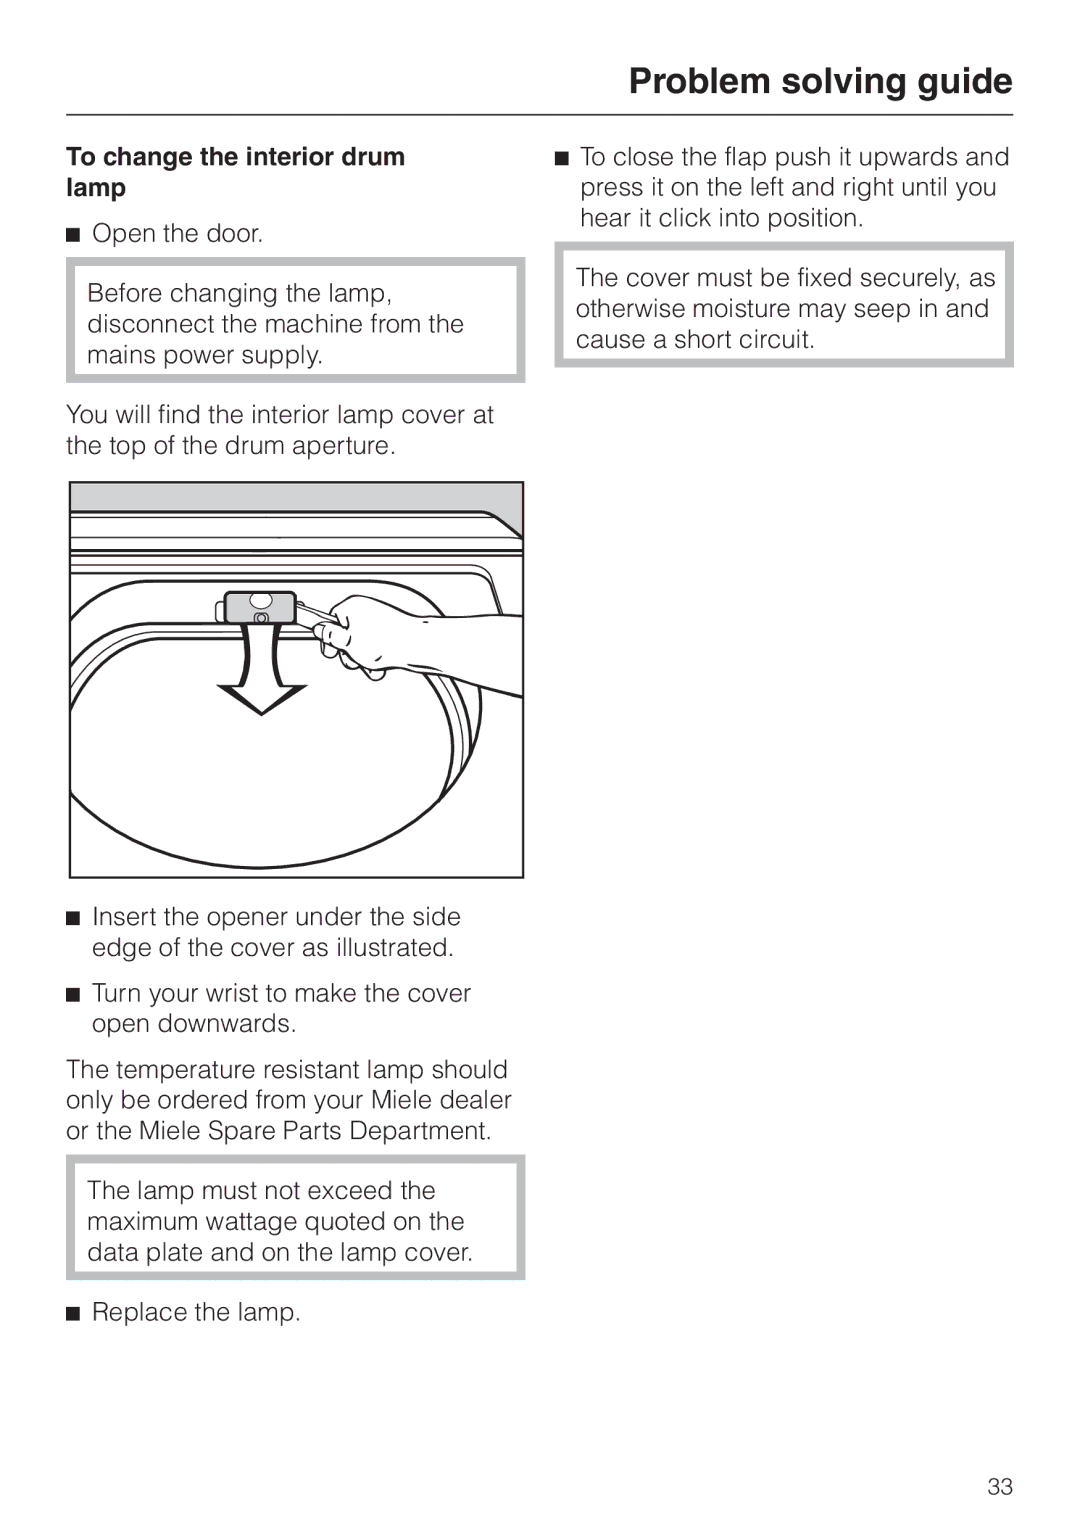 Miele T 4422 C operating instructions To change the interior drum lamp 